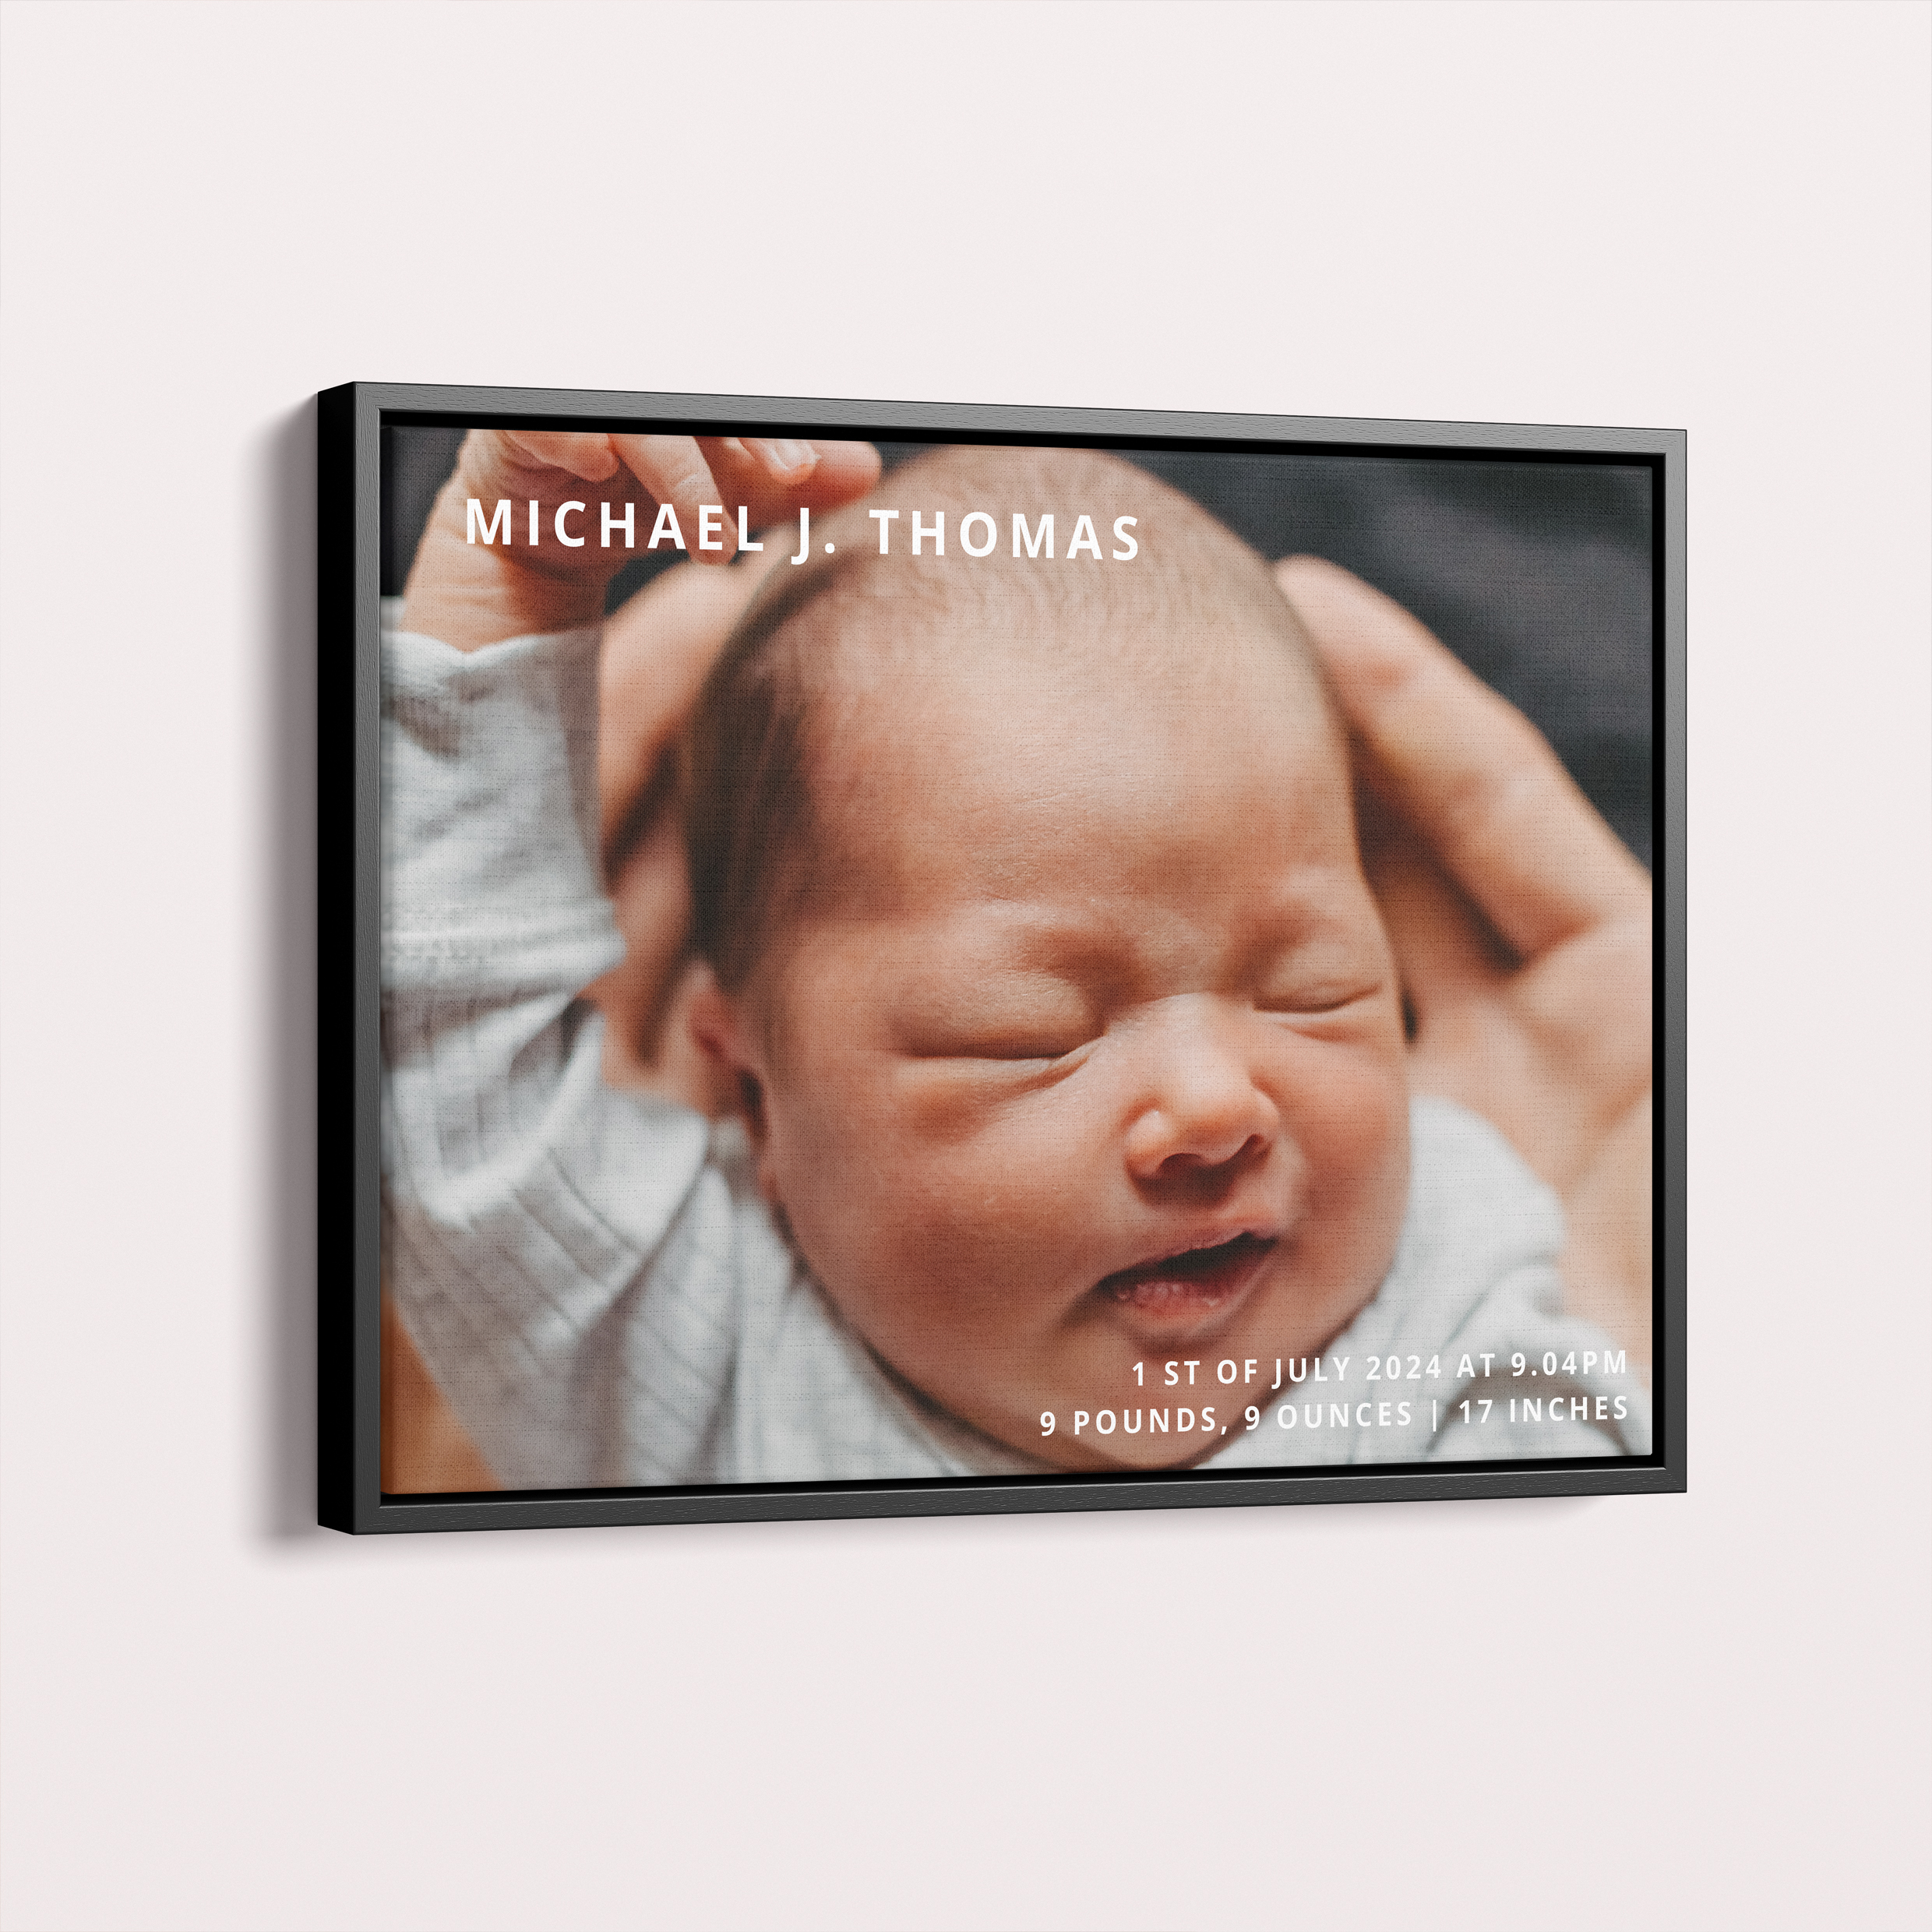 Personalised Child's Portrait Framed Photo Canvas - Cherish Parenthood with Utterly Printable